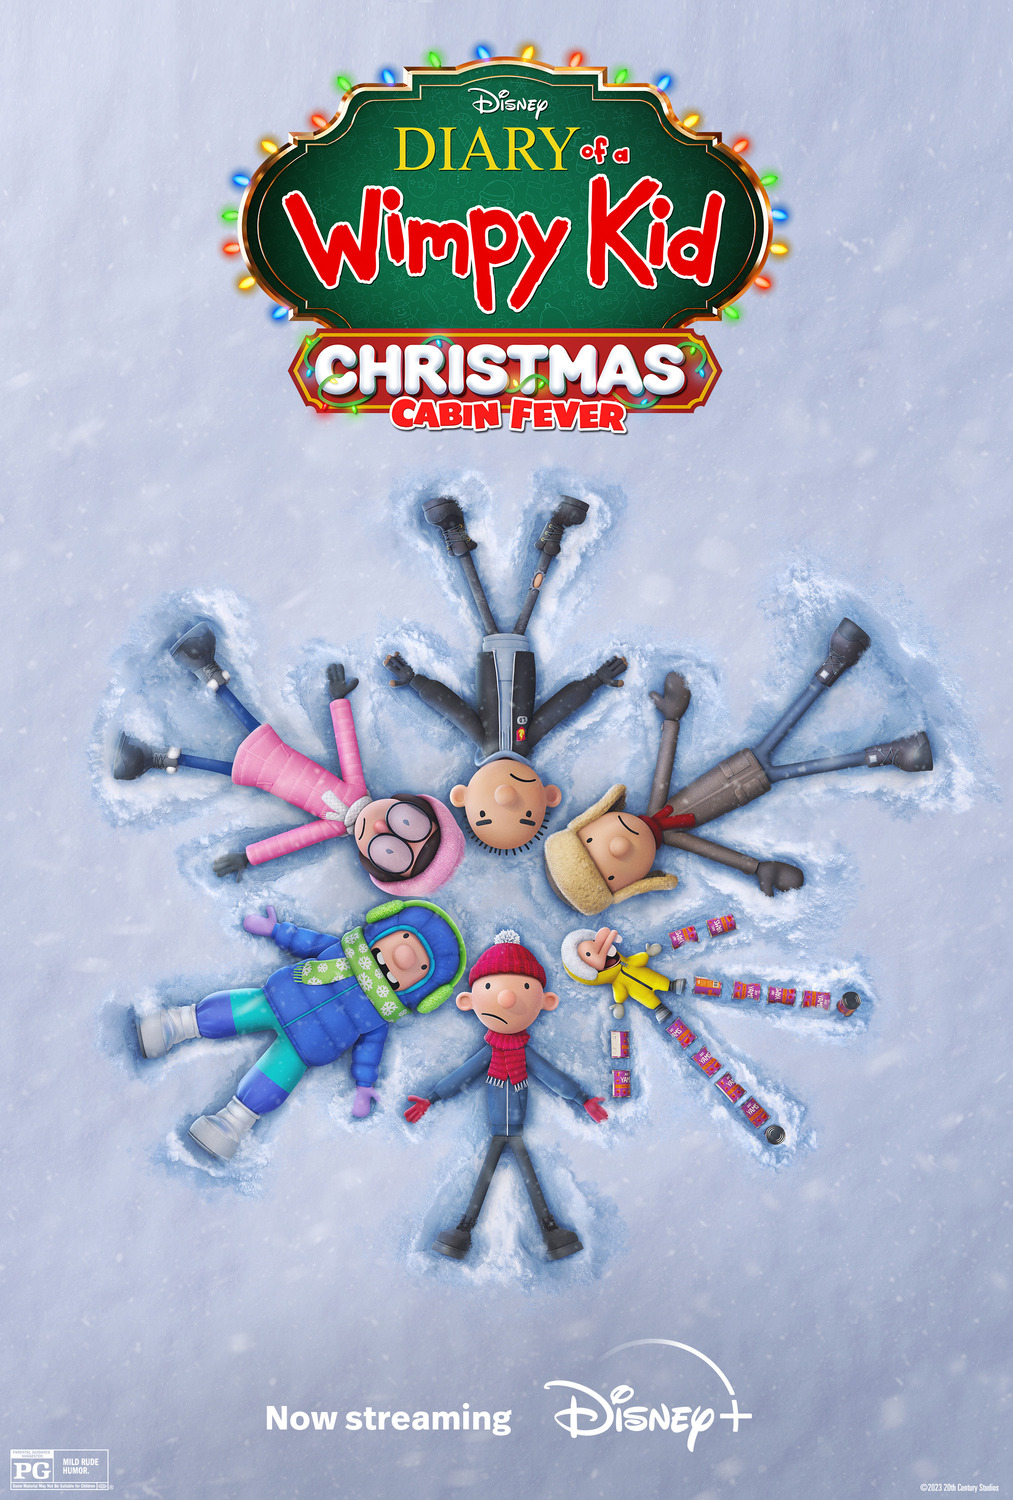 Extra Large Movie Poster Image for Diary of a Wimpy Kid Christmas: Cabin Fever (#4 of 5)